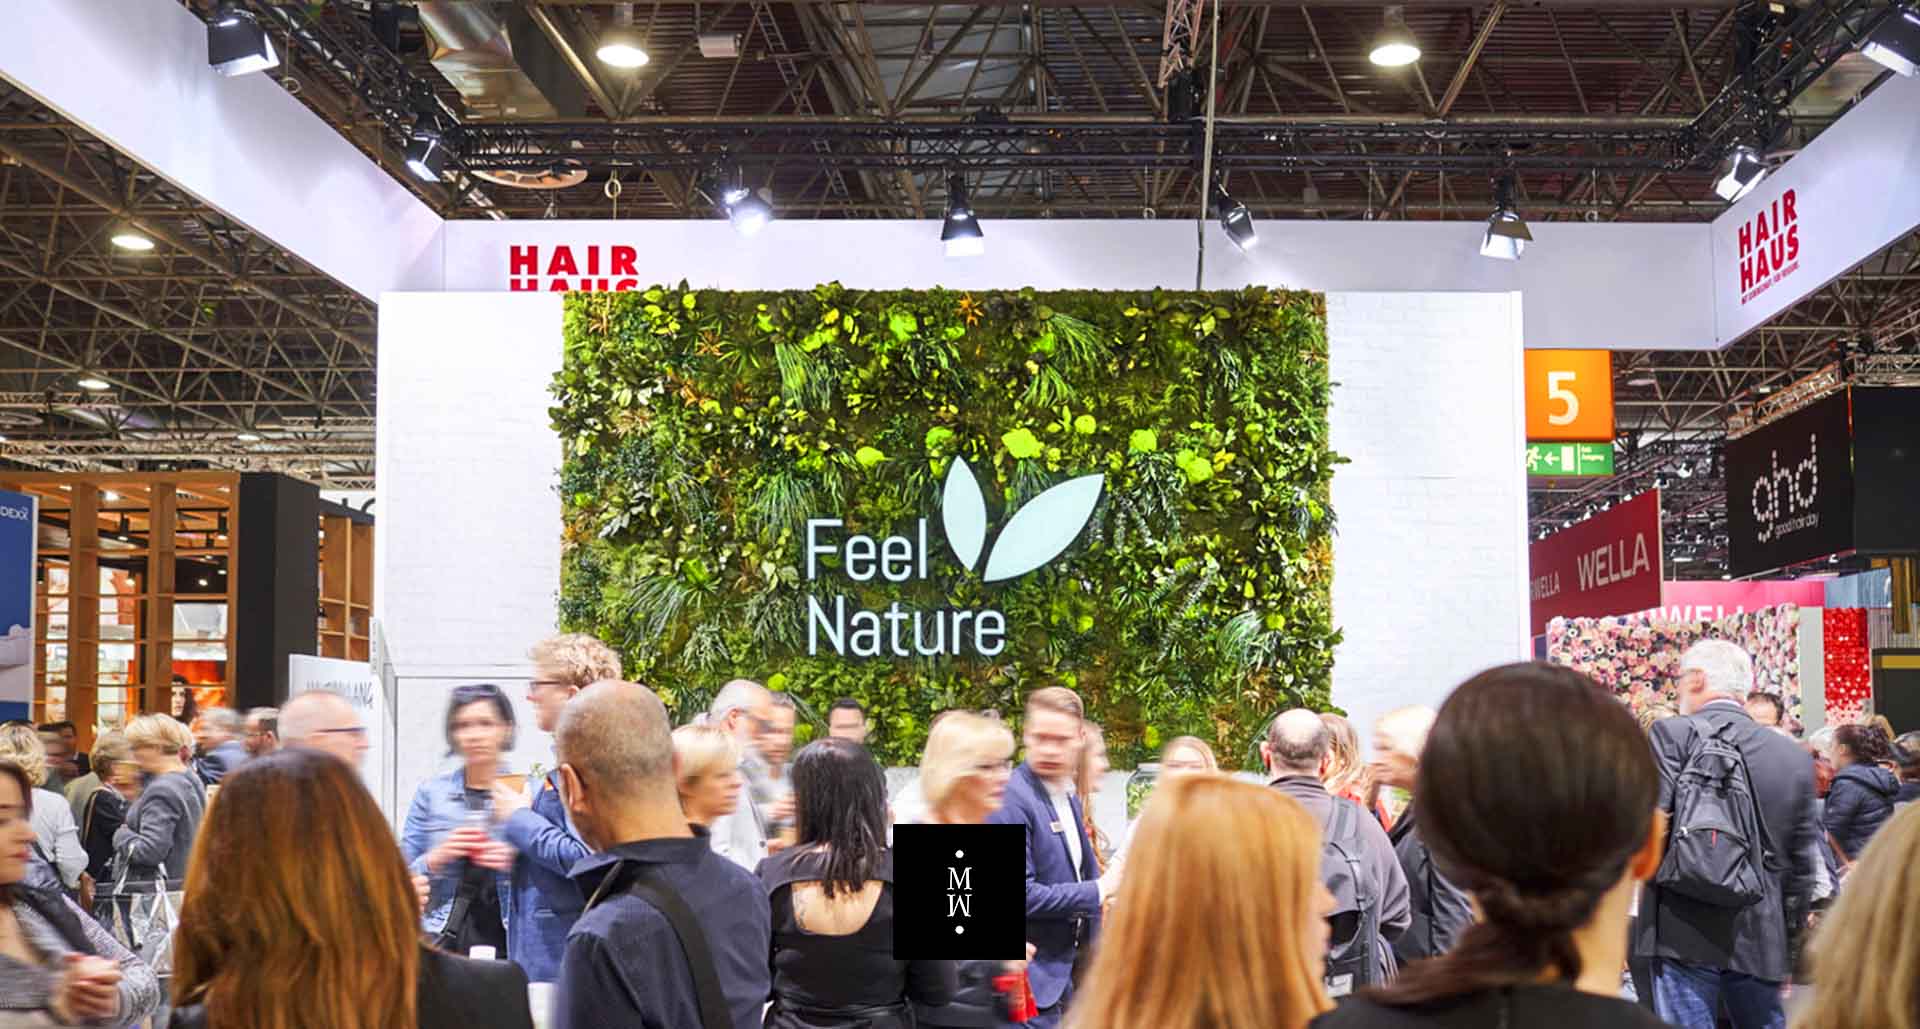 Dschungelmooswand Messestand Logo Feel Nature